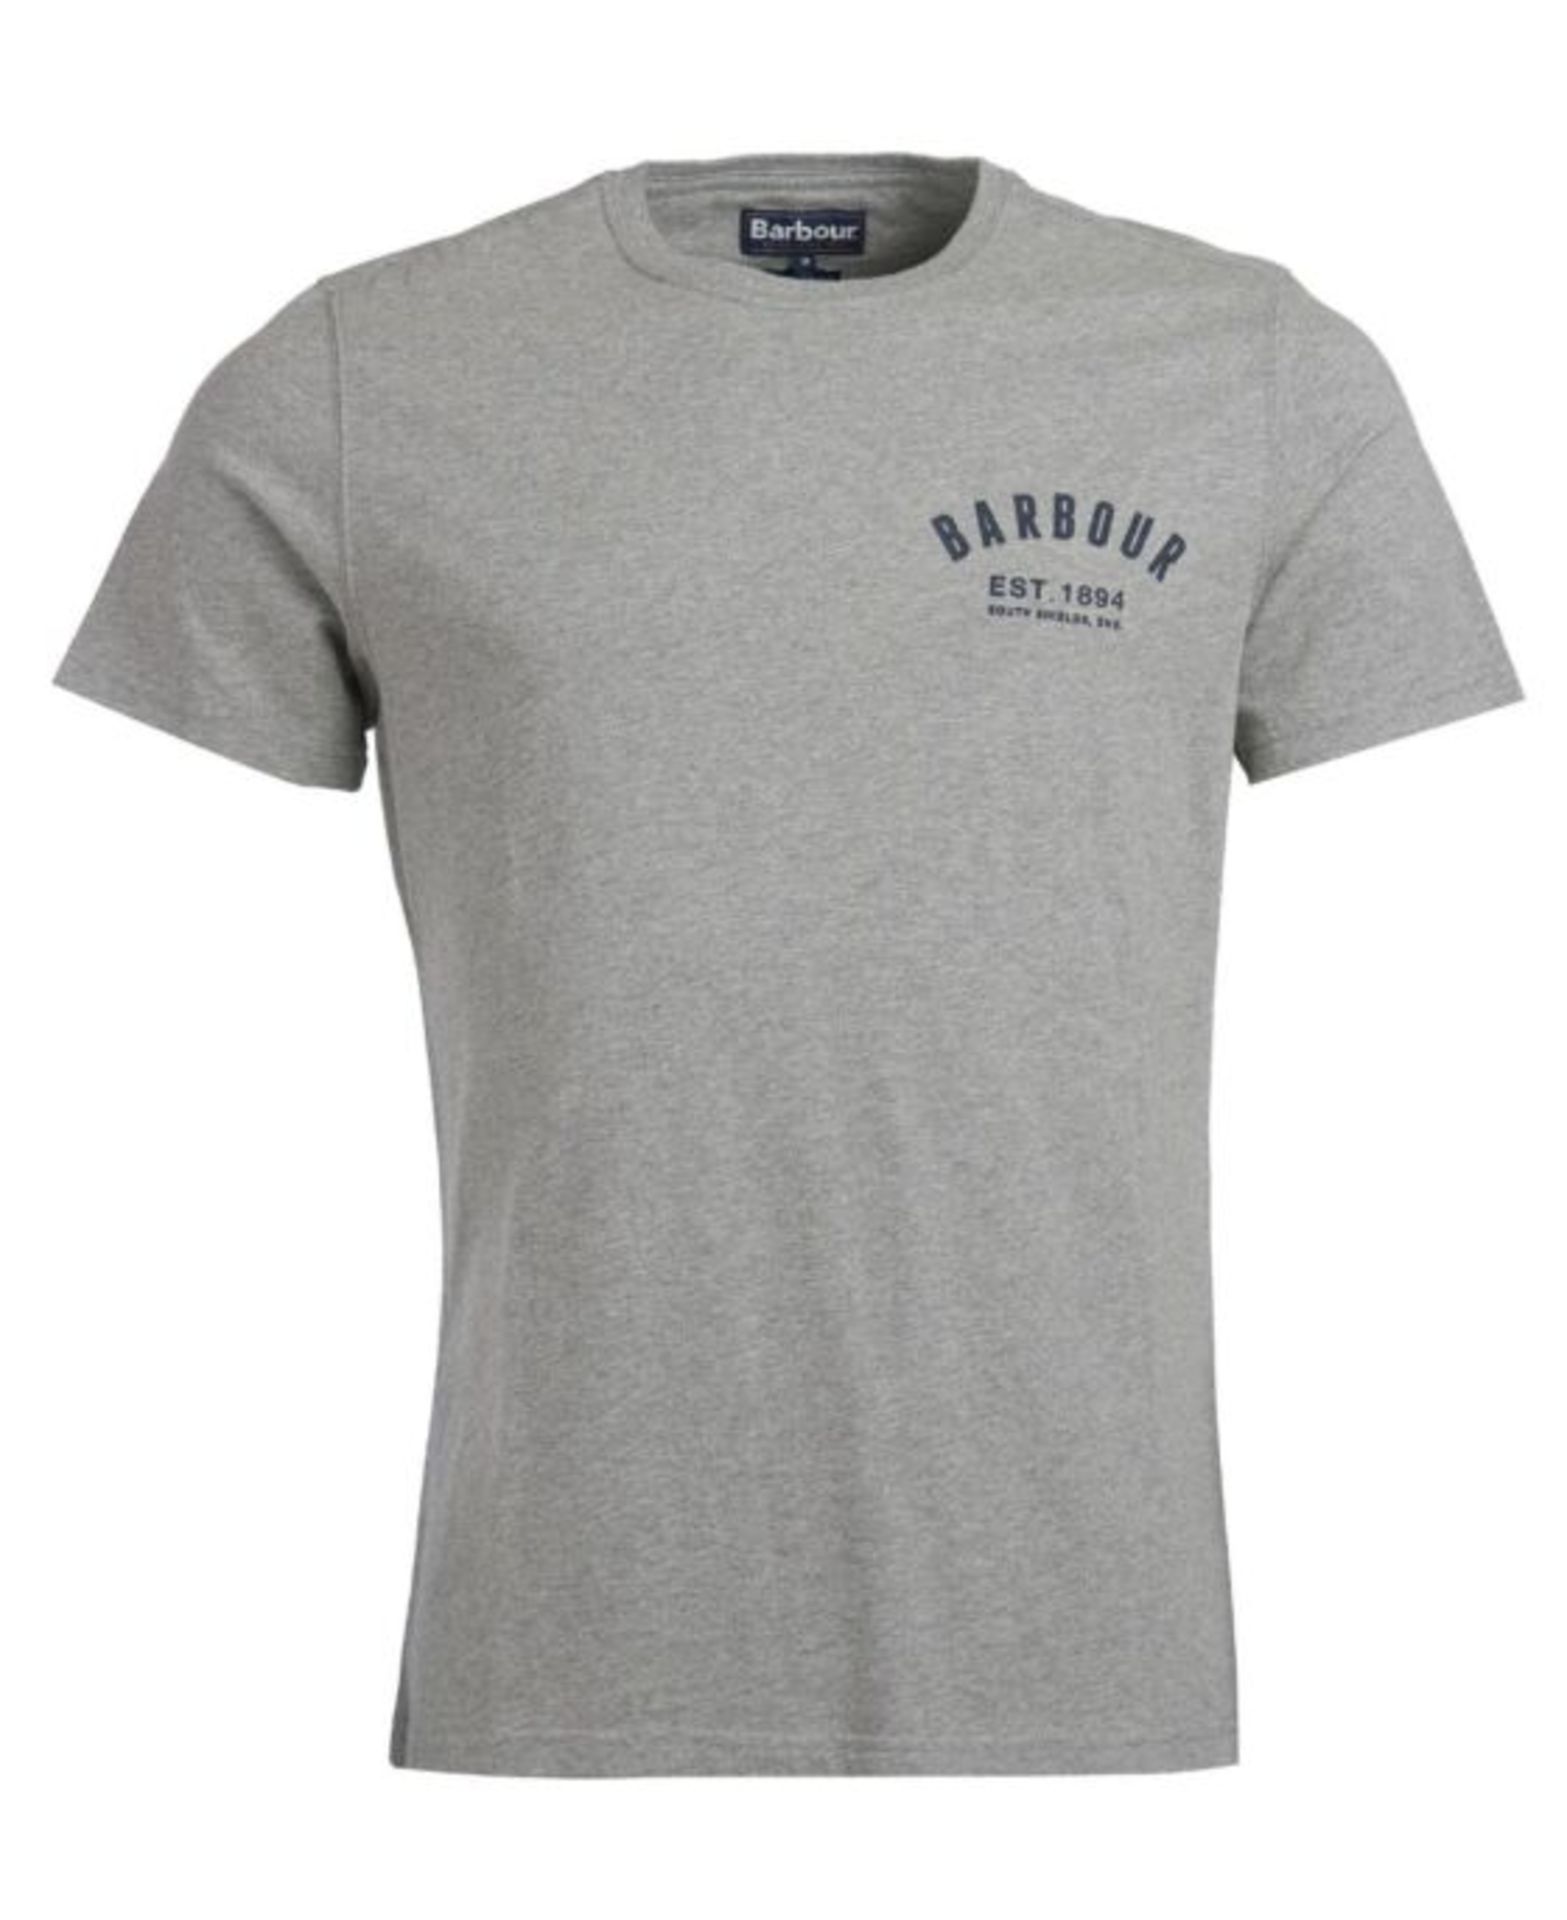 BRAND NEW BARBOUR PREPPY T SHIRT GREY MARL SIZE XL RRP £40 -1